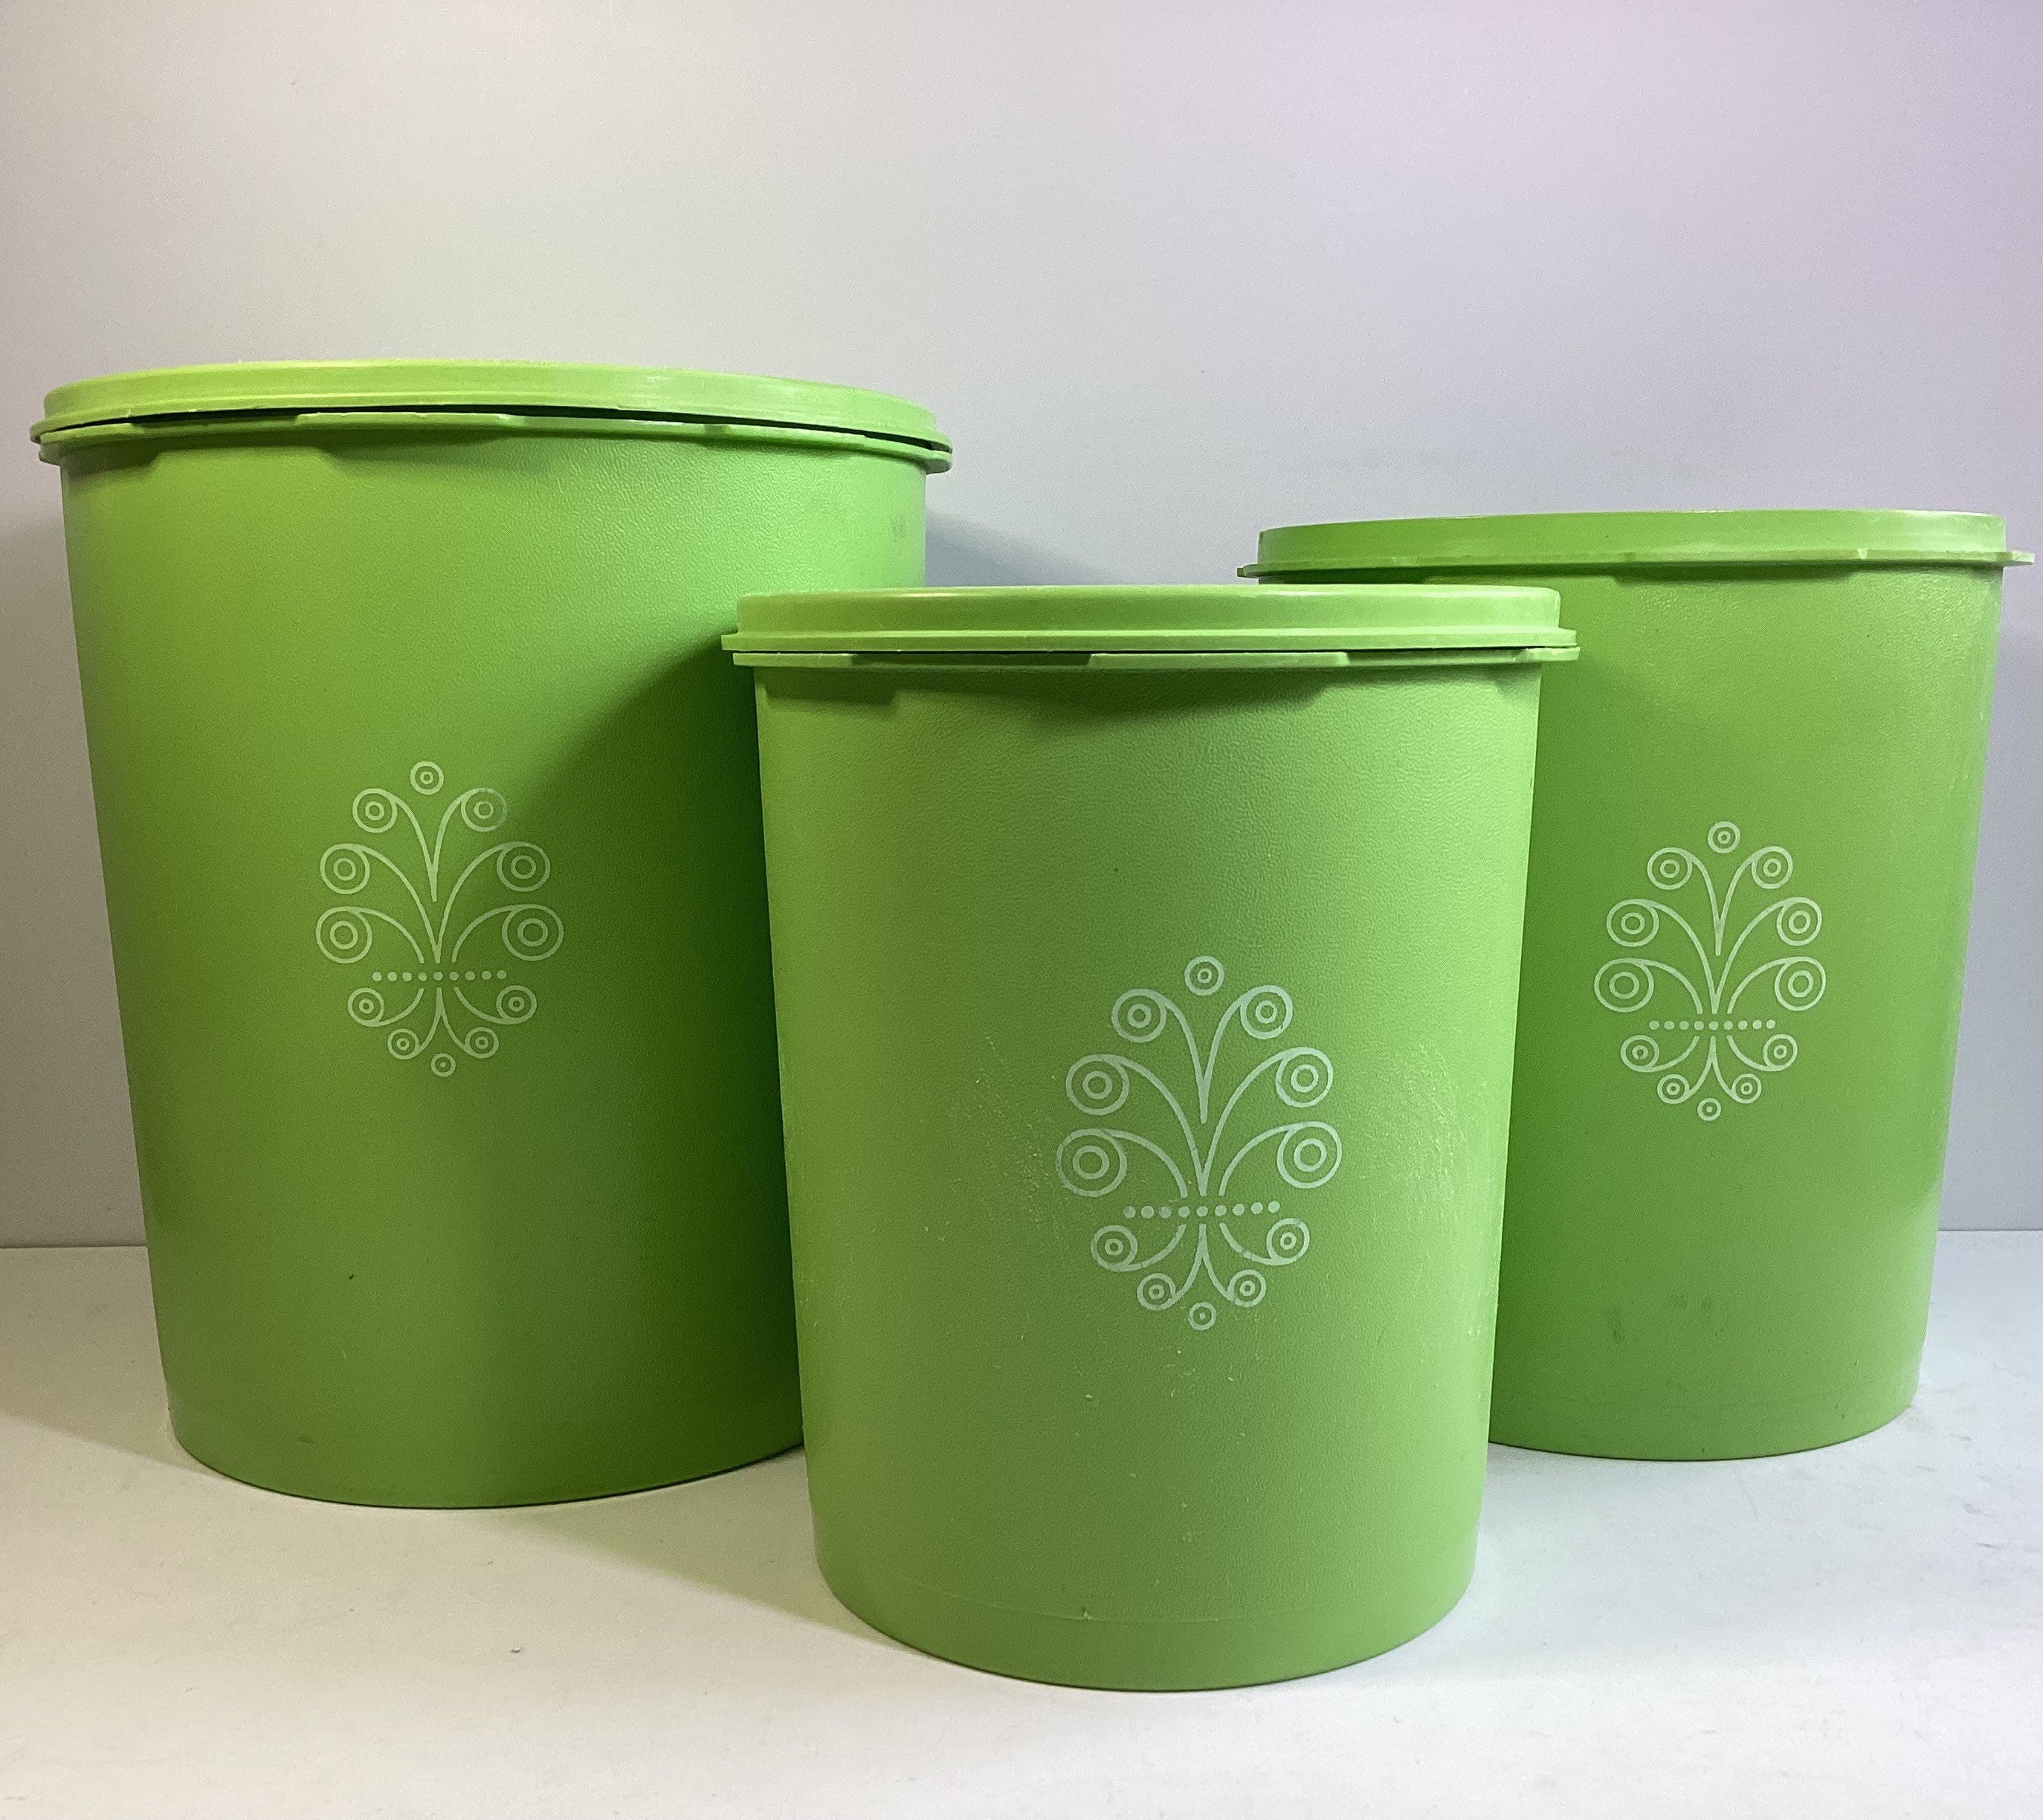 Green Vintage Tupperware Canister Set, Season Shakers w/ Wall